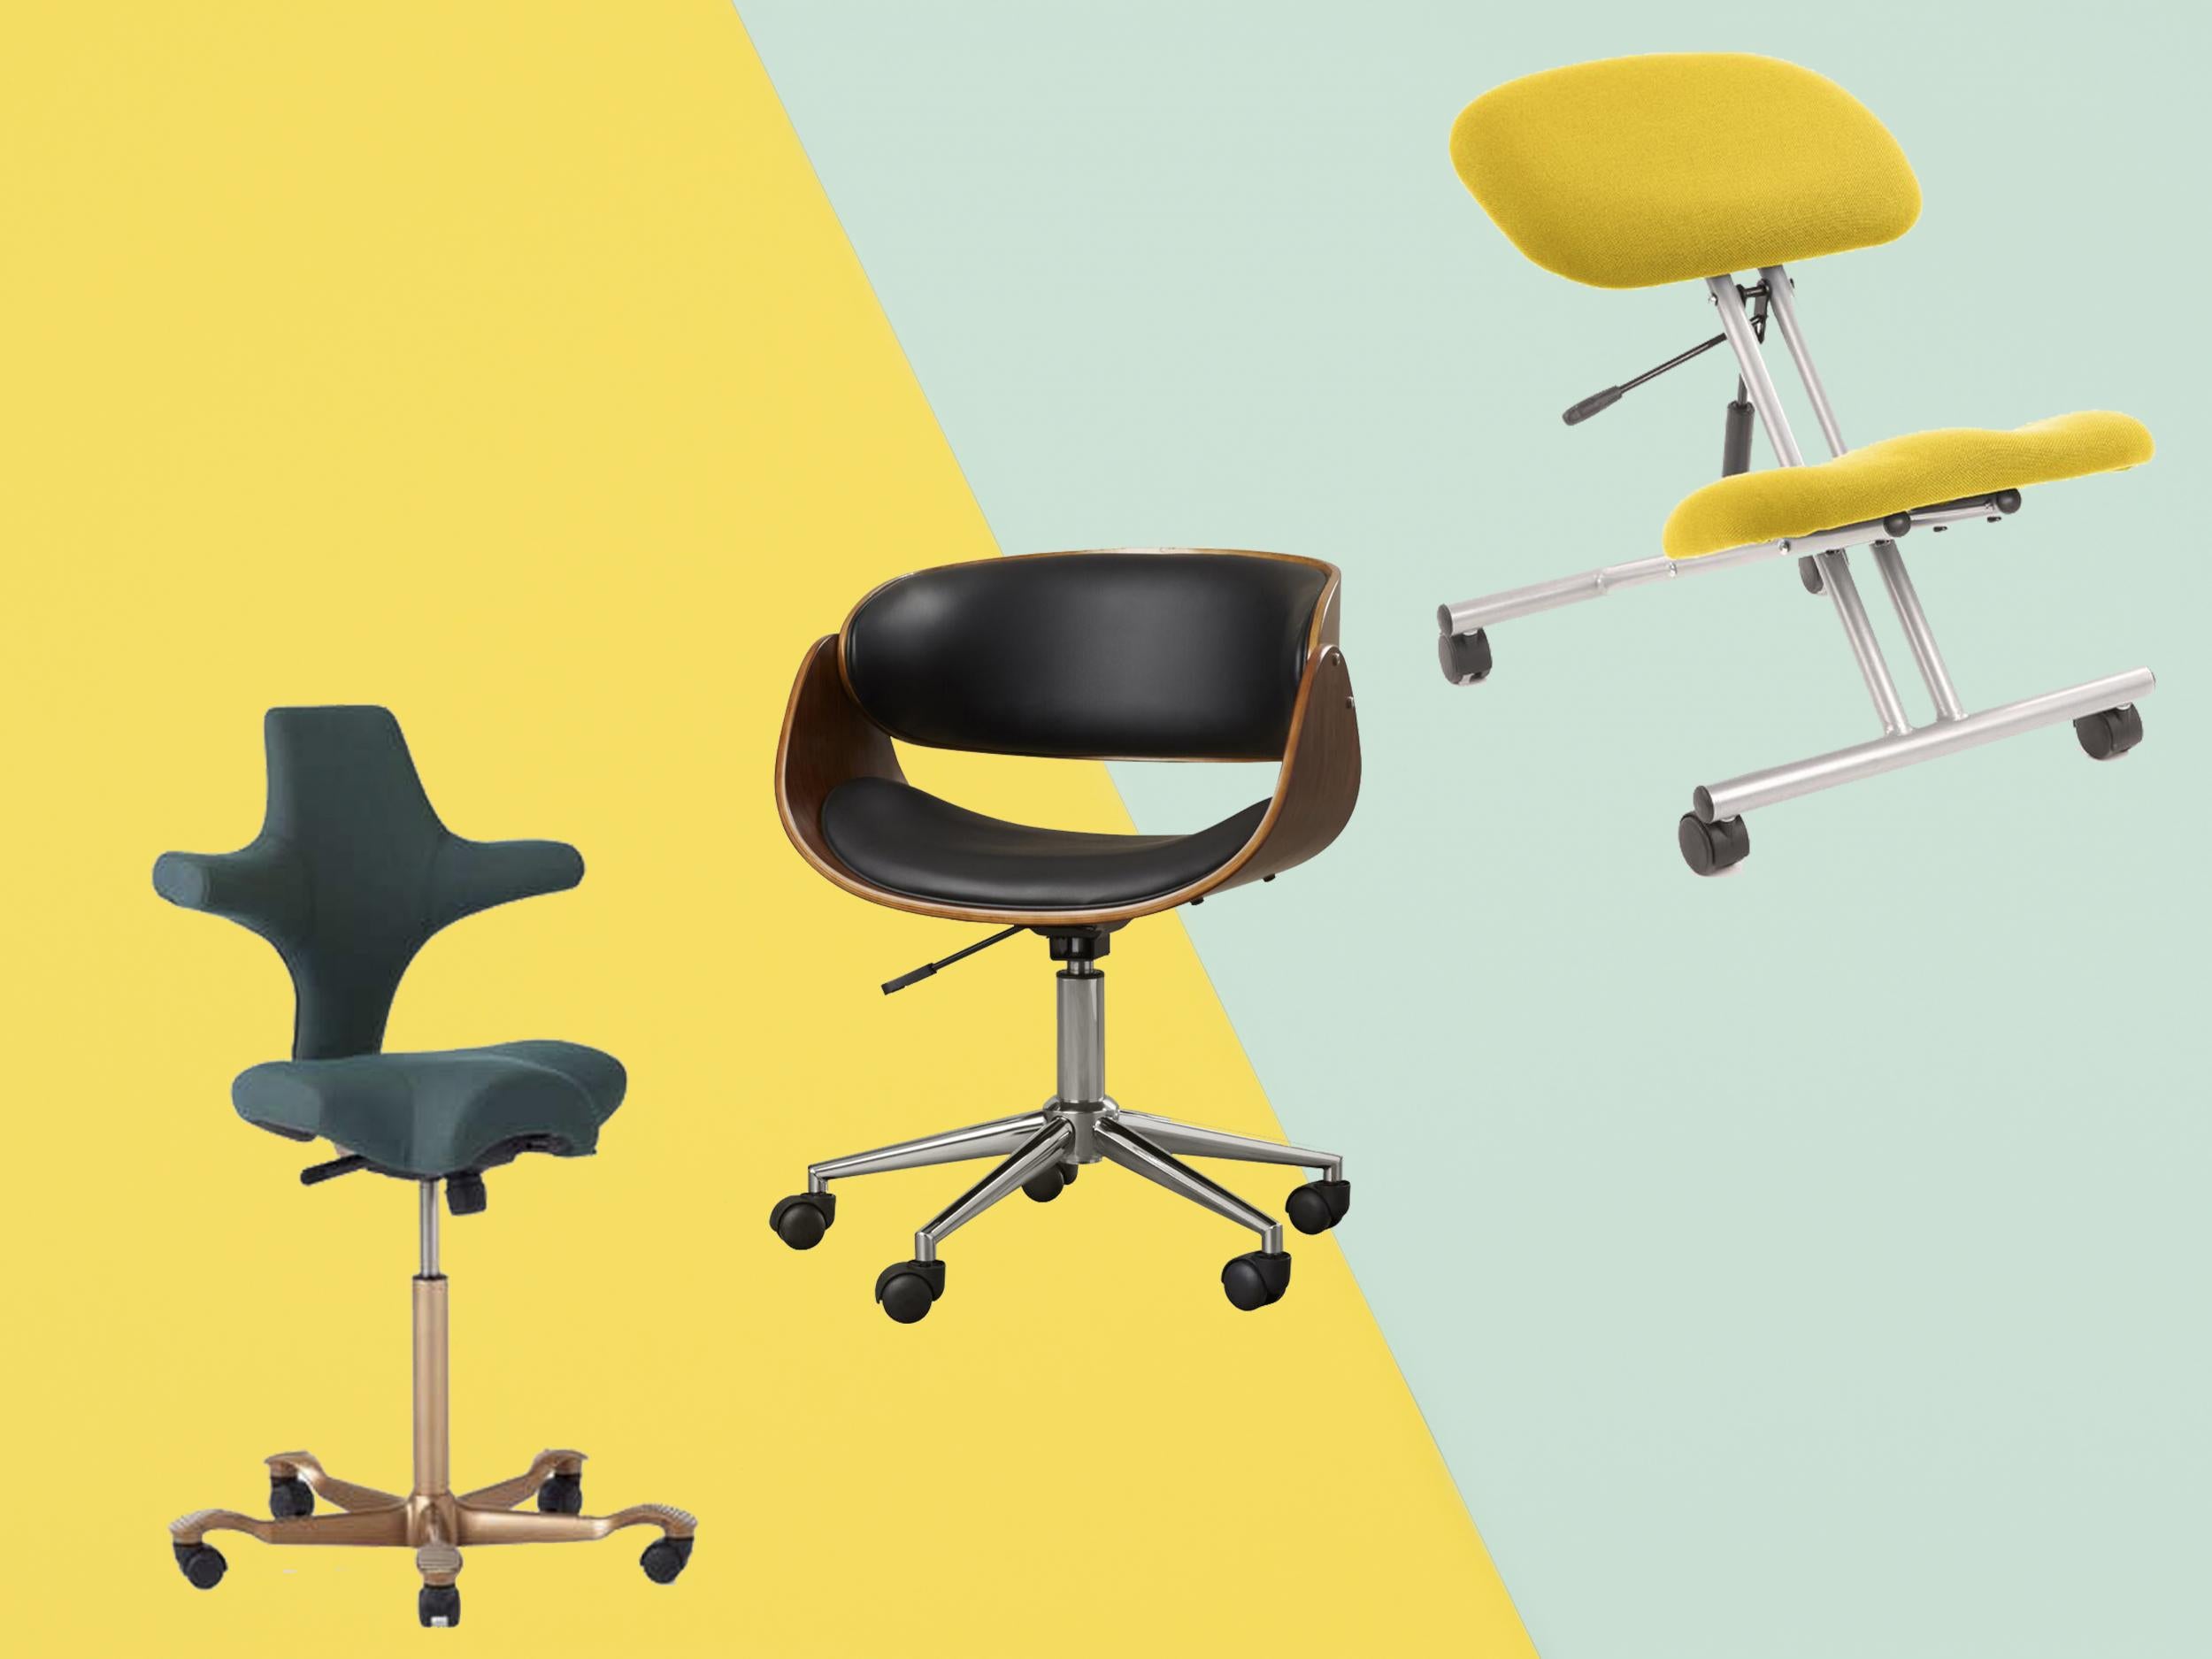 ADJUSTABLE CHAIRS FOR BETTER WORK EXPERIENCE 1